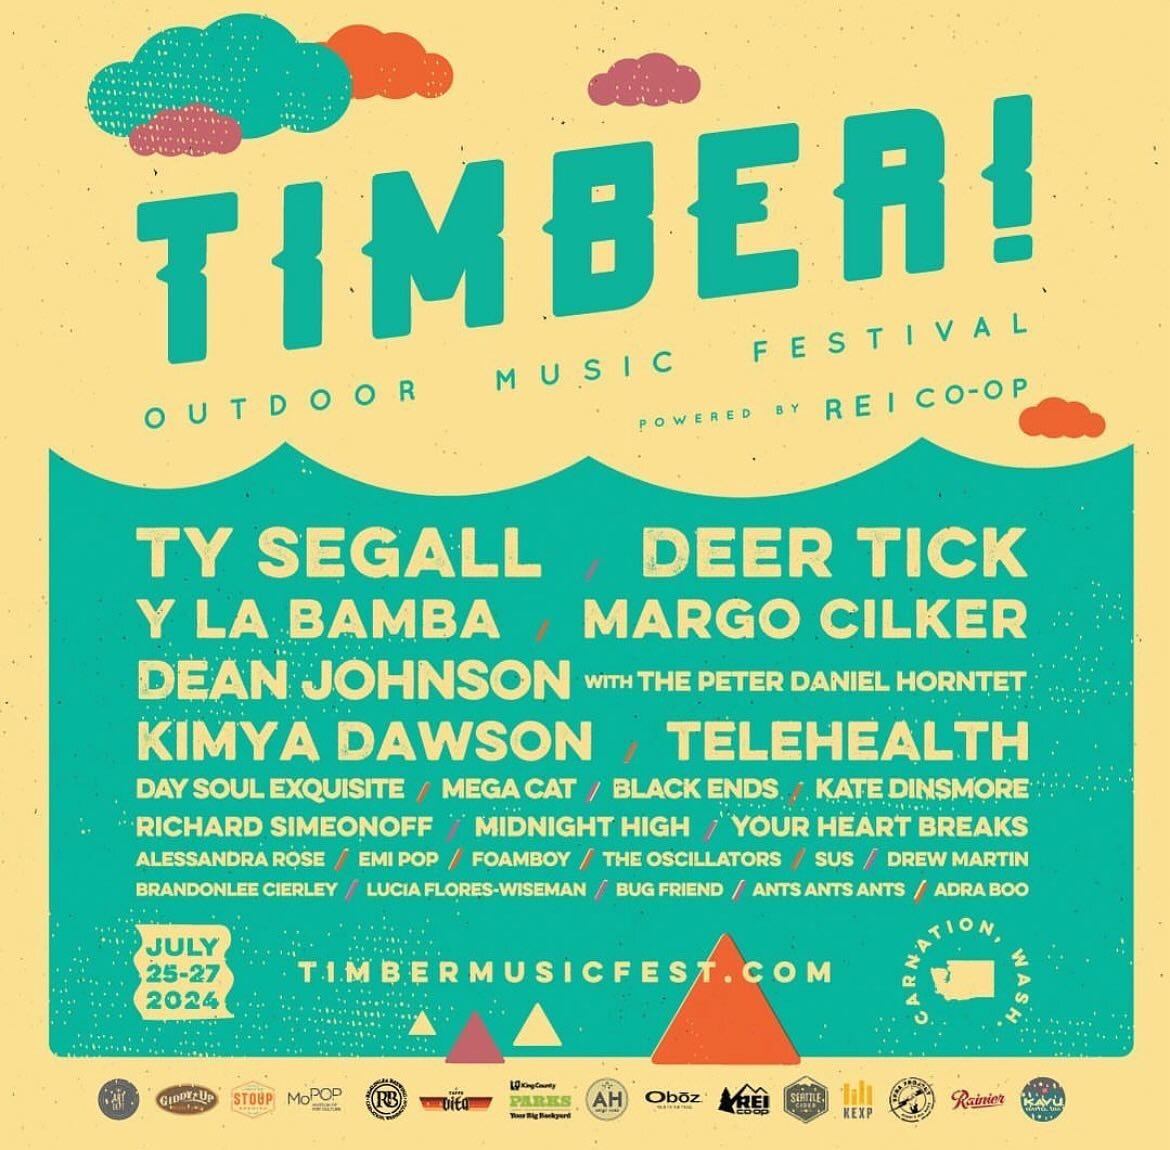 Stoked to be back at @timberfest this Summer with this very cool lineup. See ya in July friends! Tix on sale now @artisthome